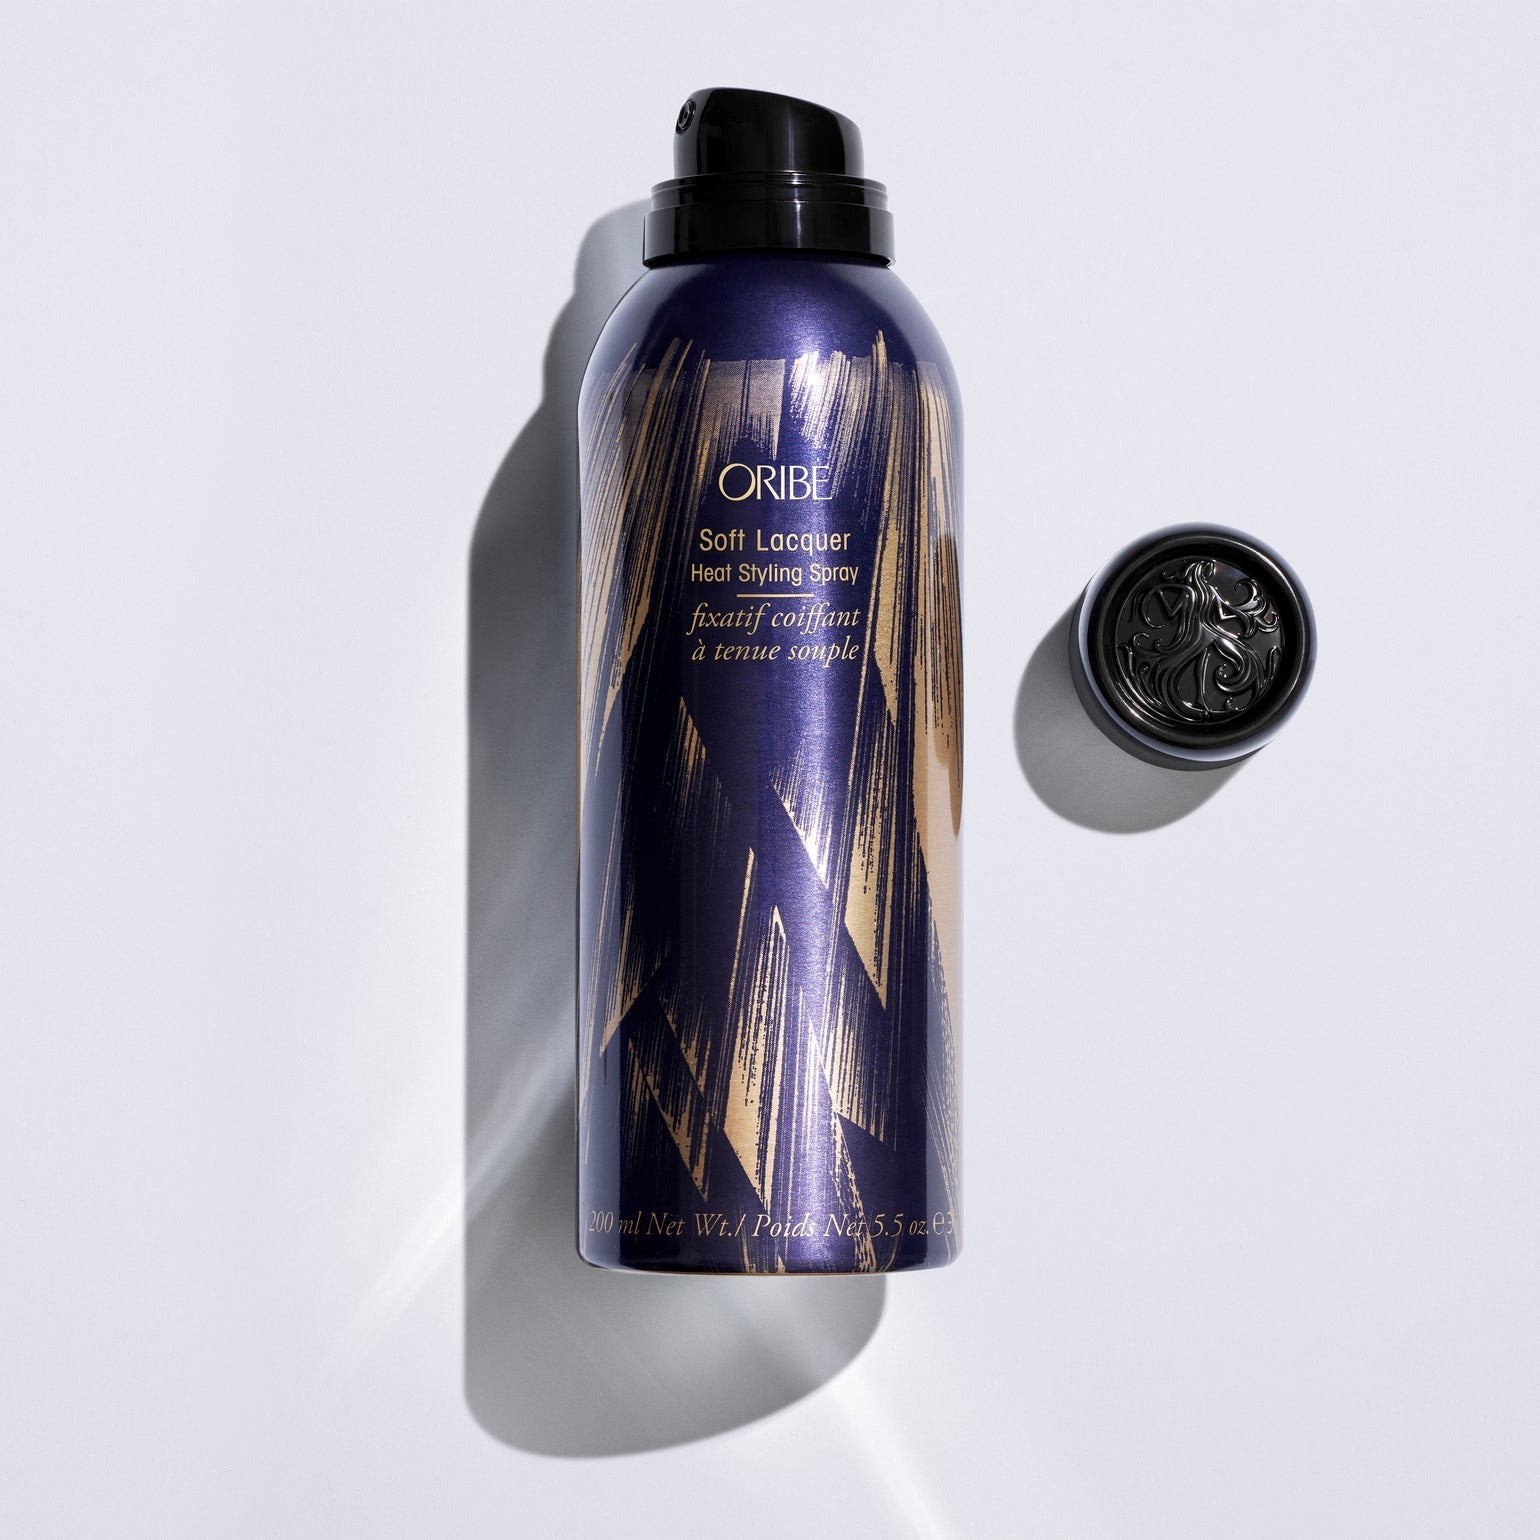 Soft Lacquer Heat Styling Spray – Oribe Hair Care